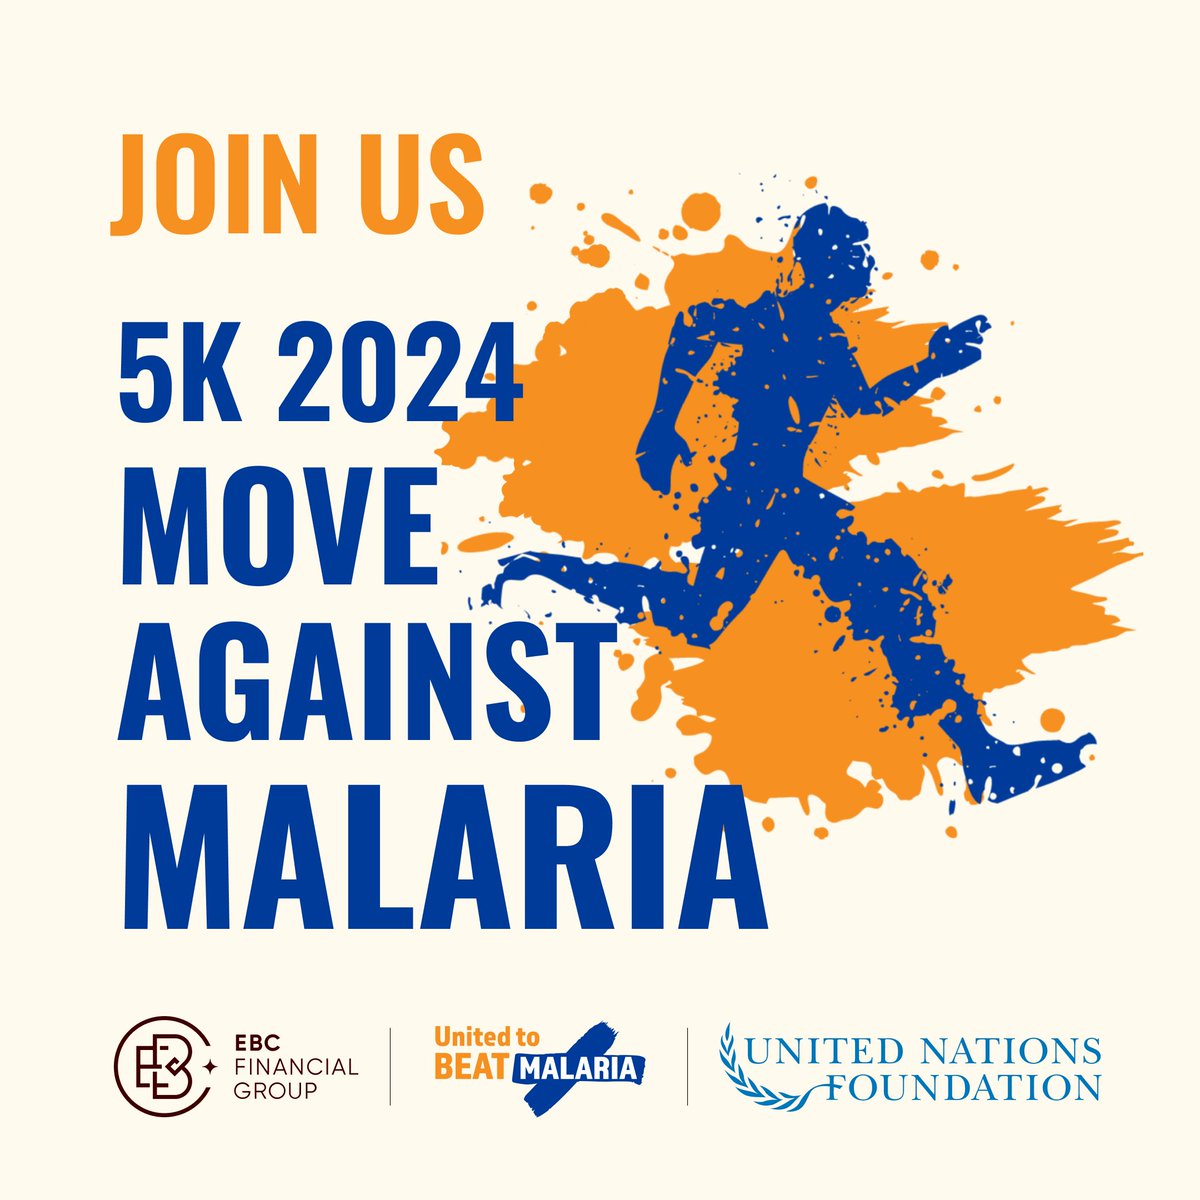 We CAN be the generation to end Malaria! Together, let's reshape the future for everyone to thrive. Join us for a 5K run against malaria! Every step you take brings us closer to ending this preventable disease. Let's run together to make a difference. Let's create a lasting